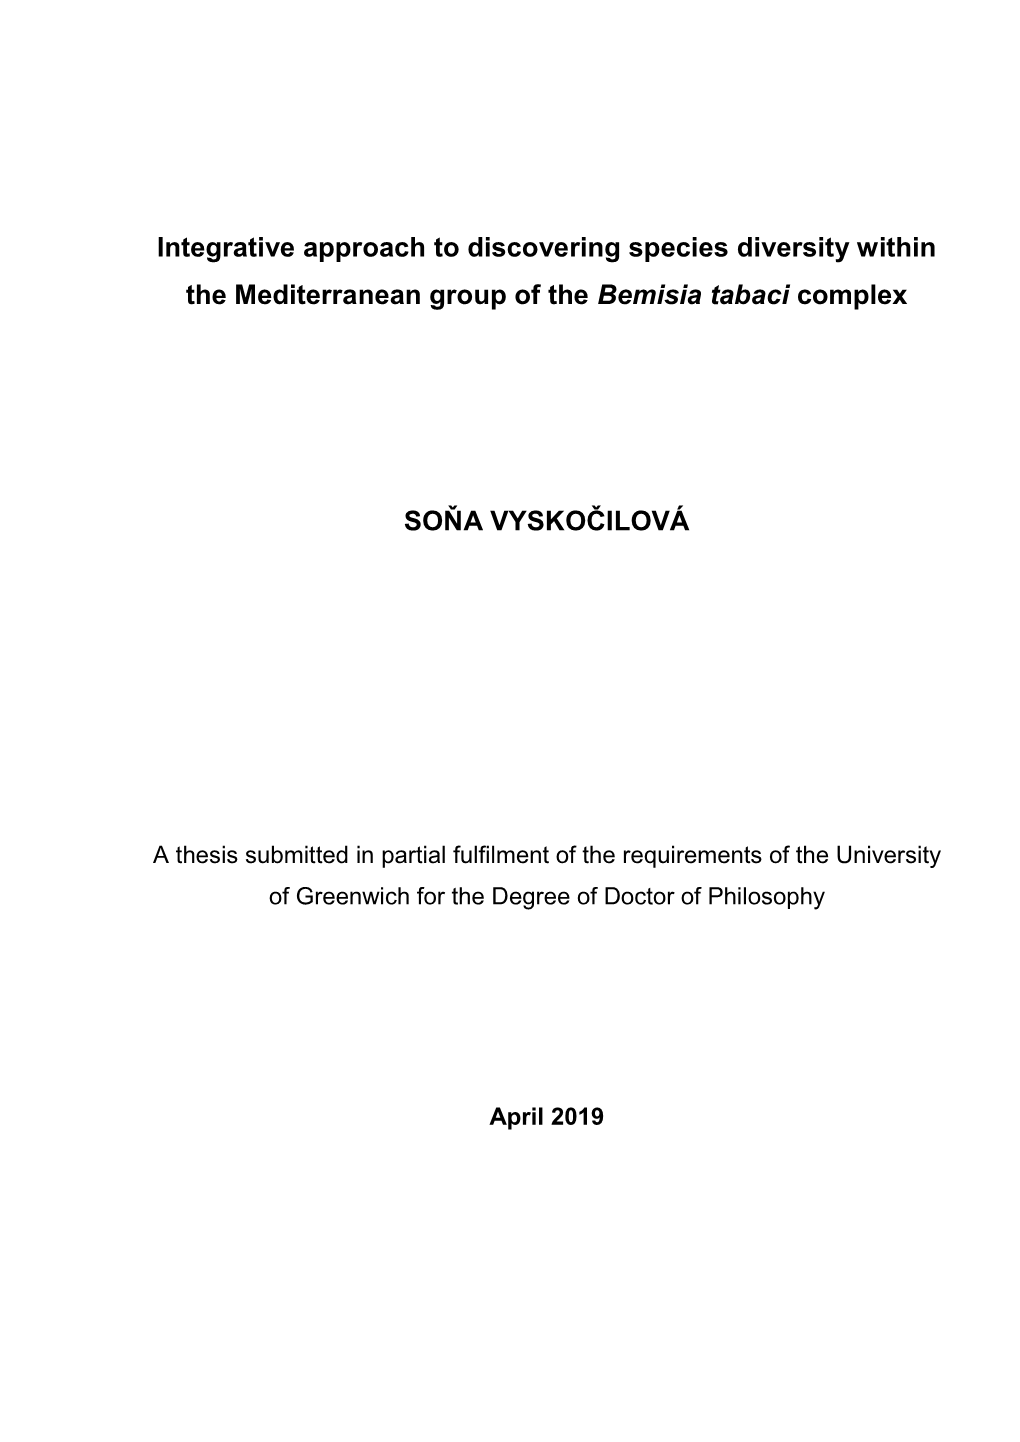 Integrative Approach to Discovering Species Diversity Within the Mediterranean Group of the Bemisia Tabaci Complex